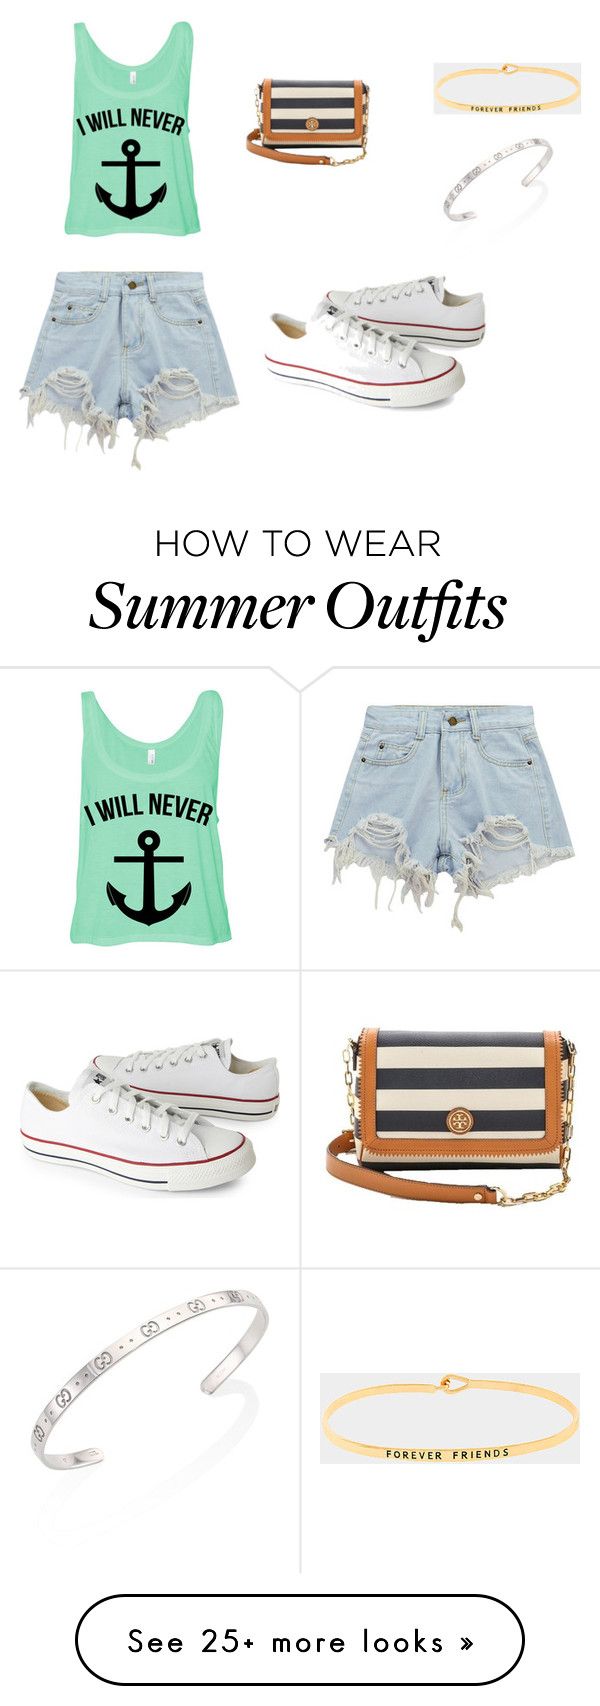 "summer day with friends" by zoebug93 on Polyvore featuring Converse, ...